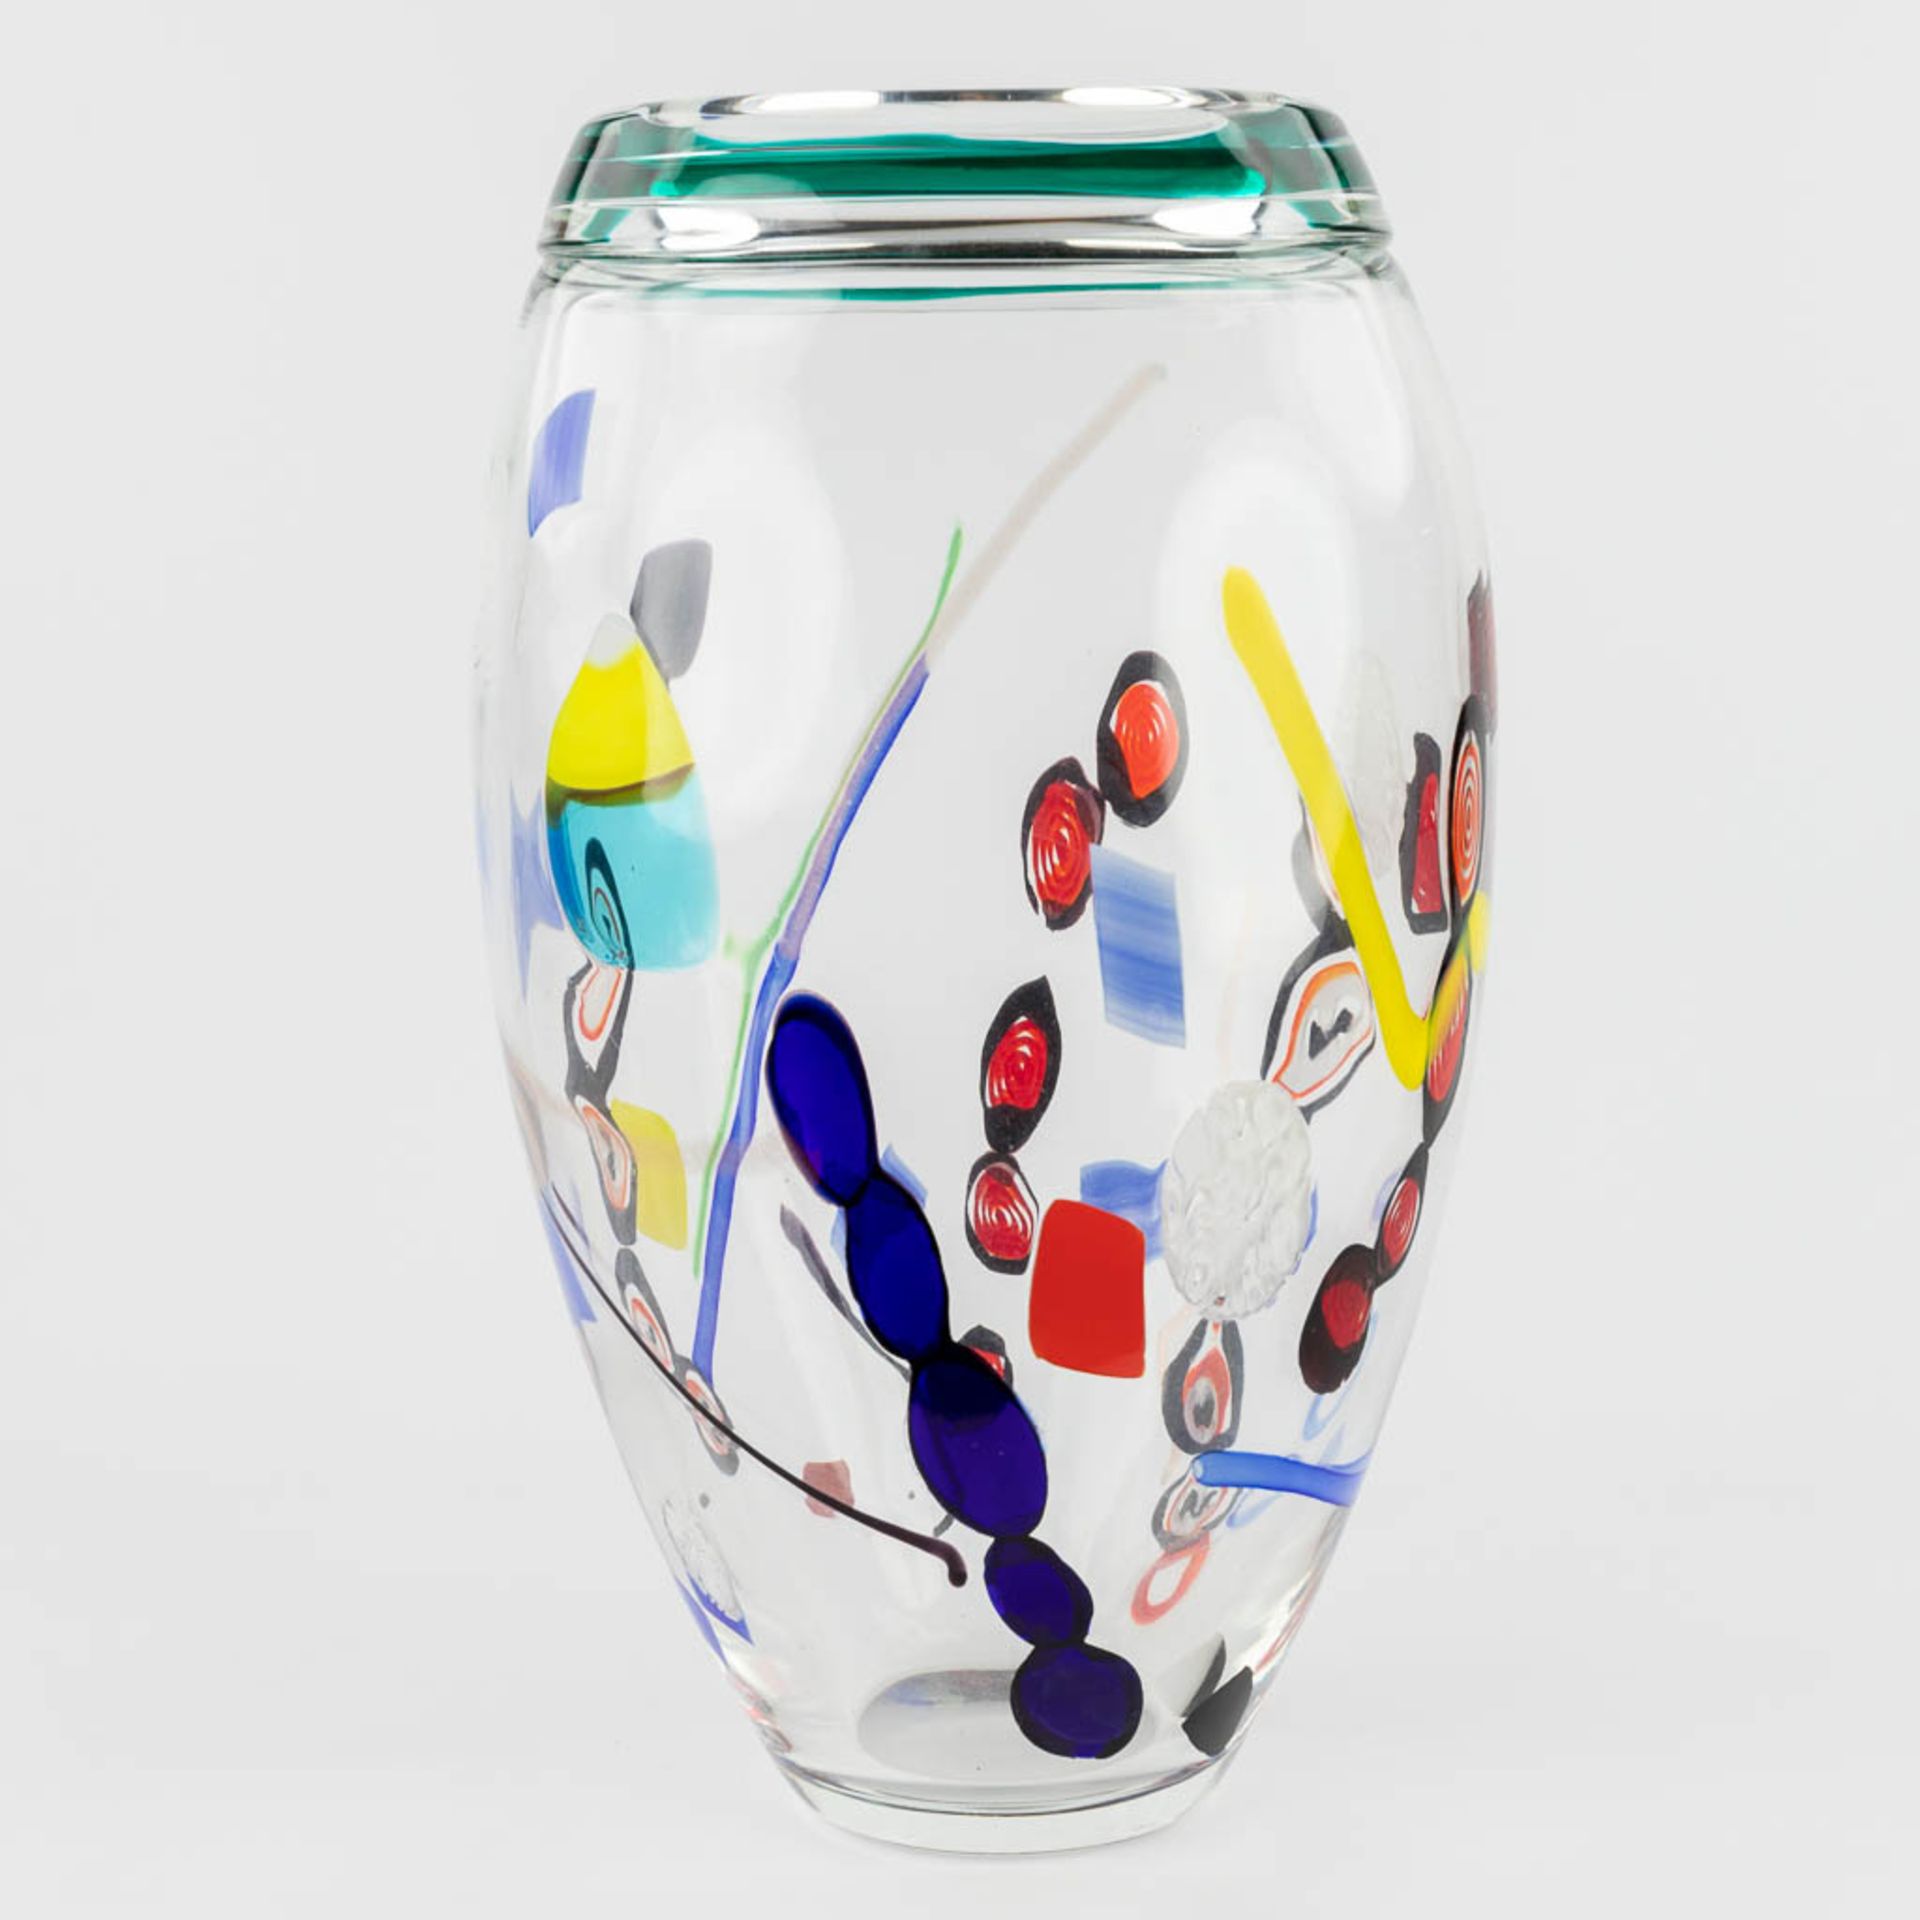 Seguso e Barovier, a large vase, glass art and made in Murano, Italy. (L: 23 x W: 27 x H: 45 cm) - Image 10 of 17